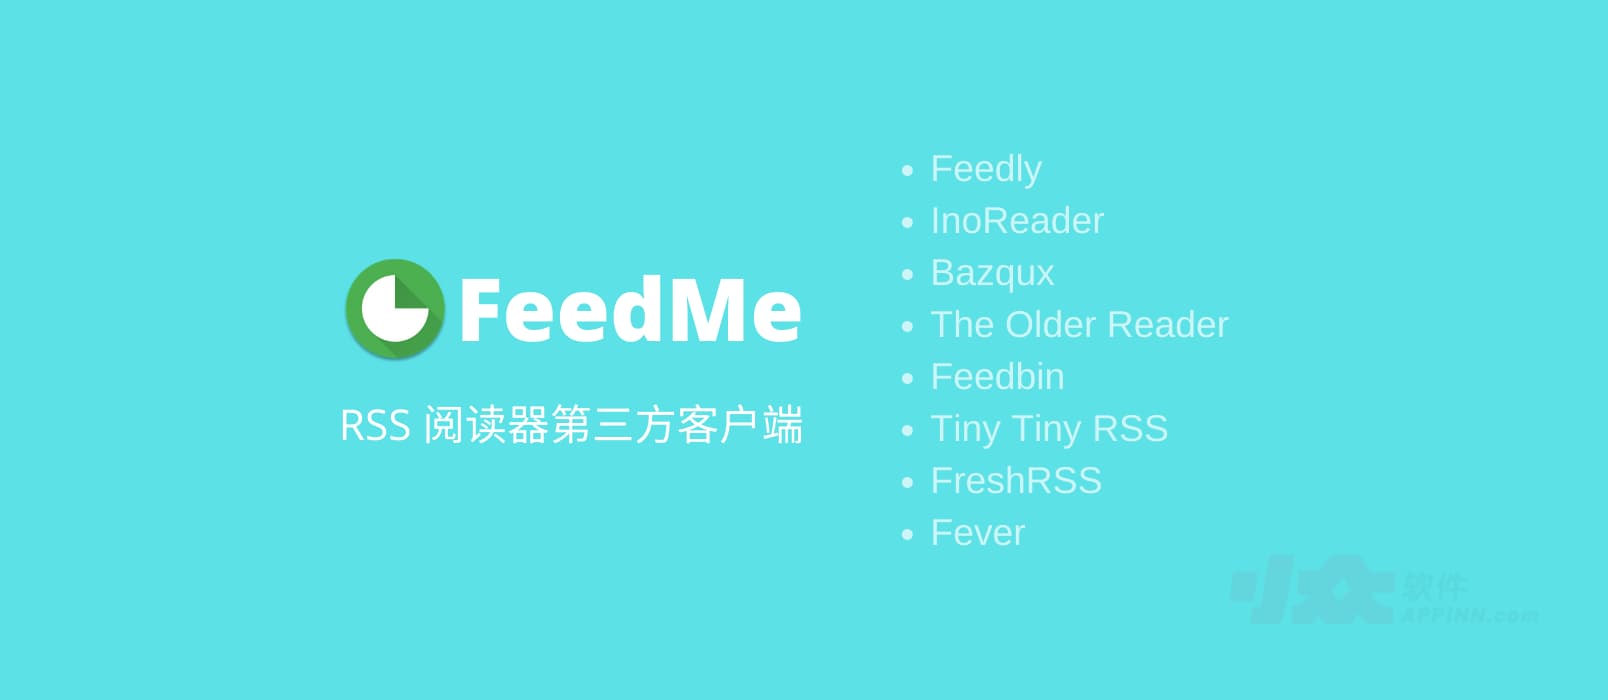 Feedme - 8大 RSS 阅读器第三方客户端[Android] 1